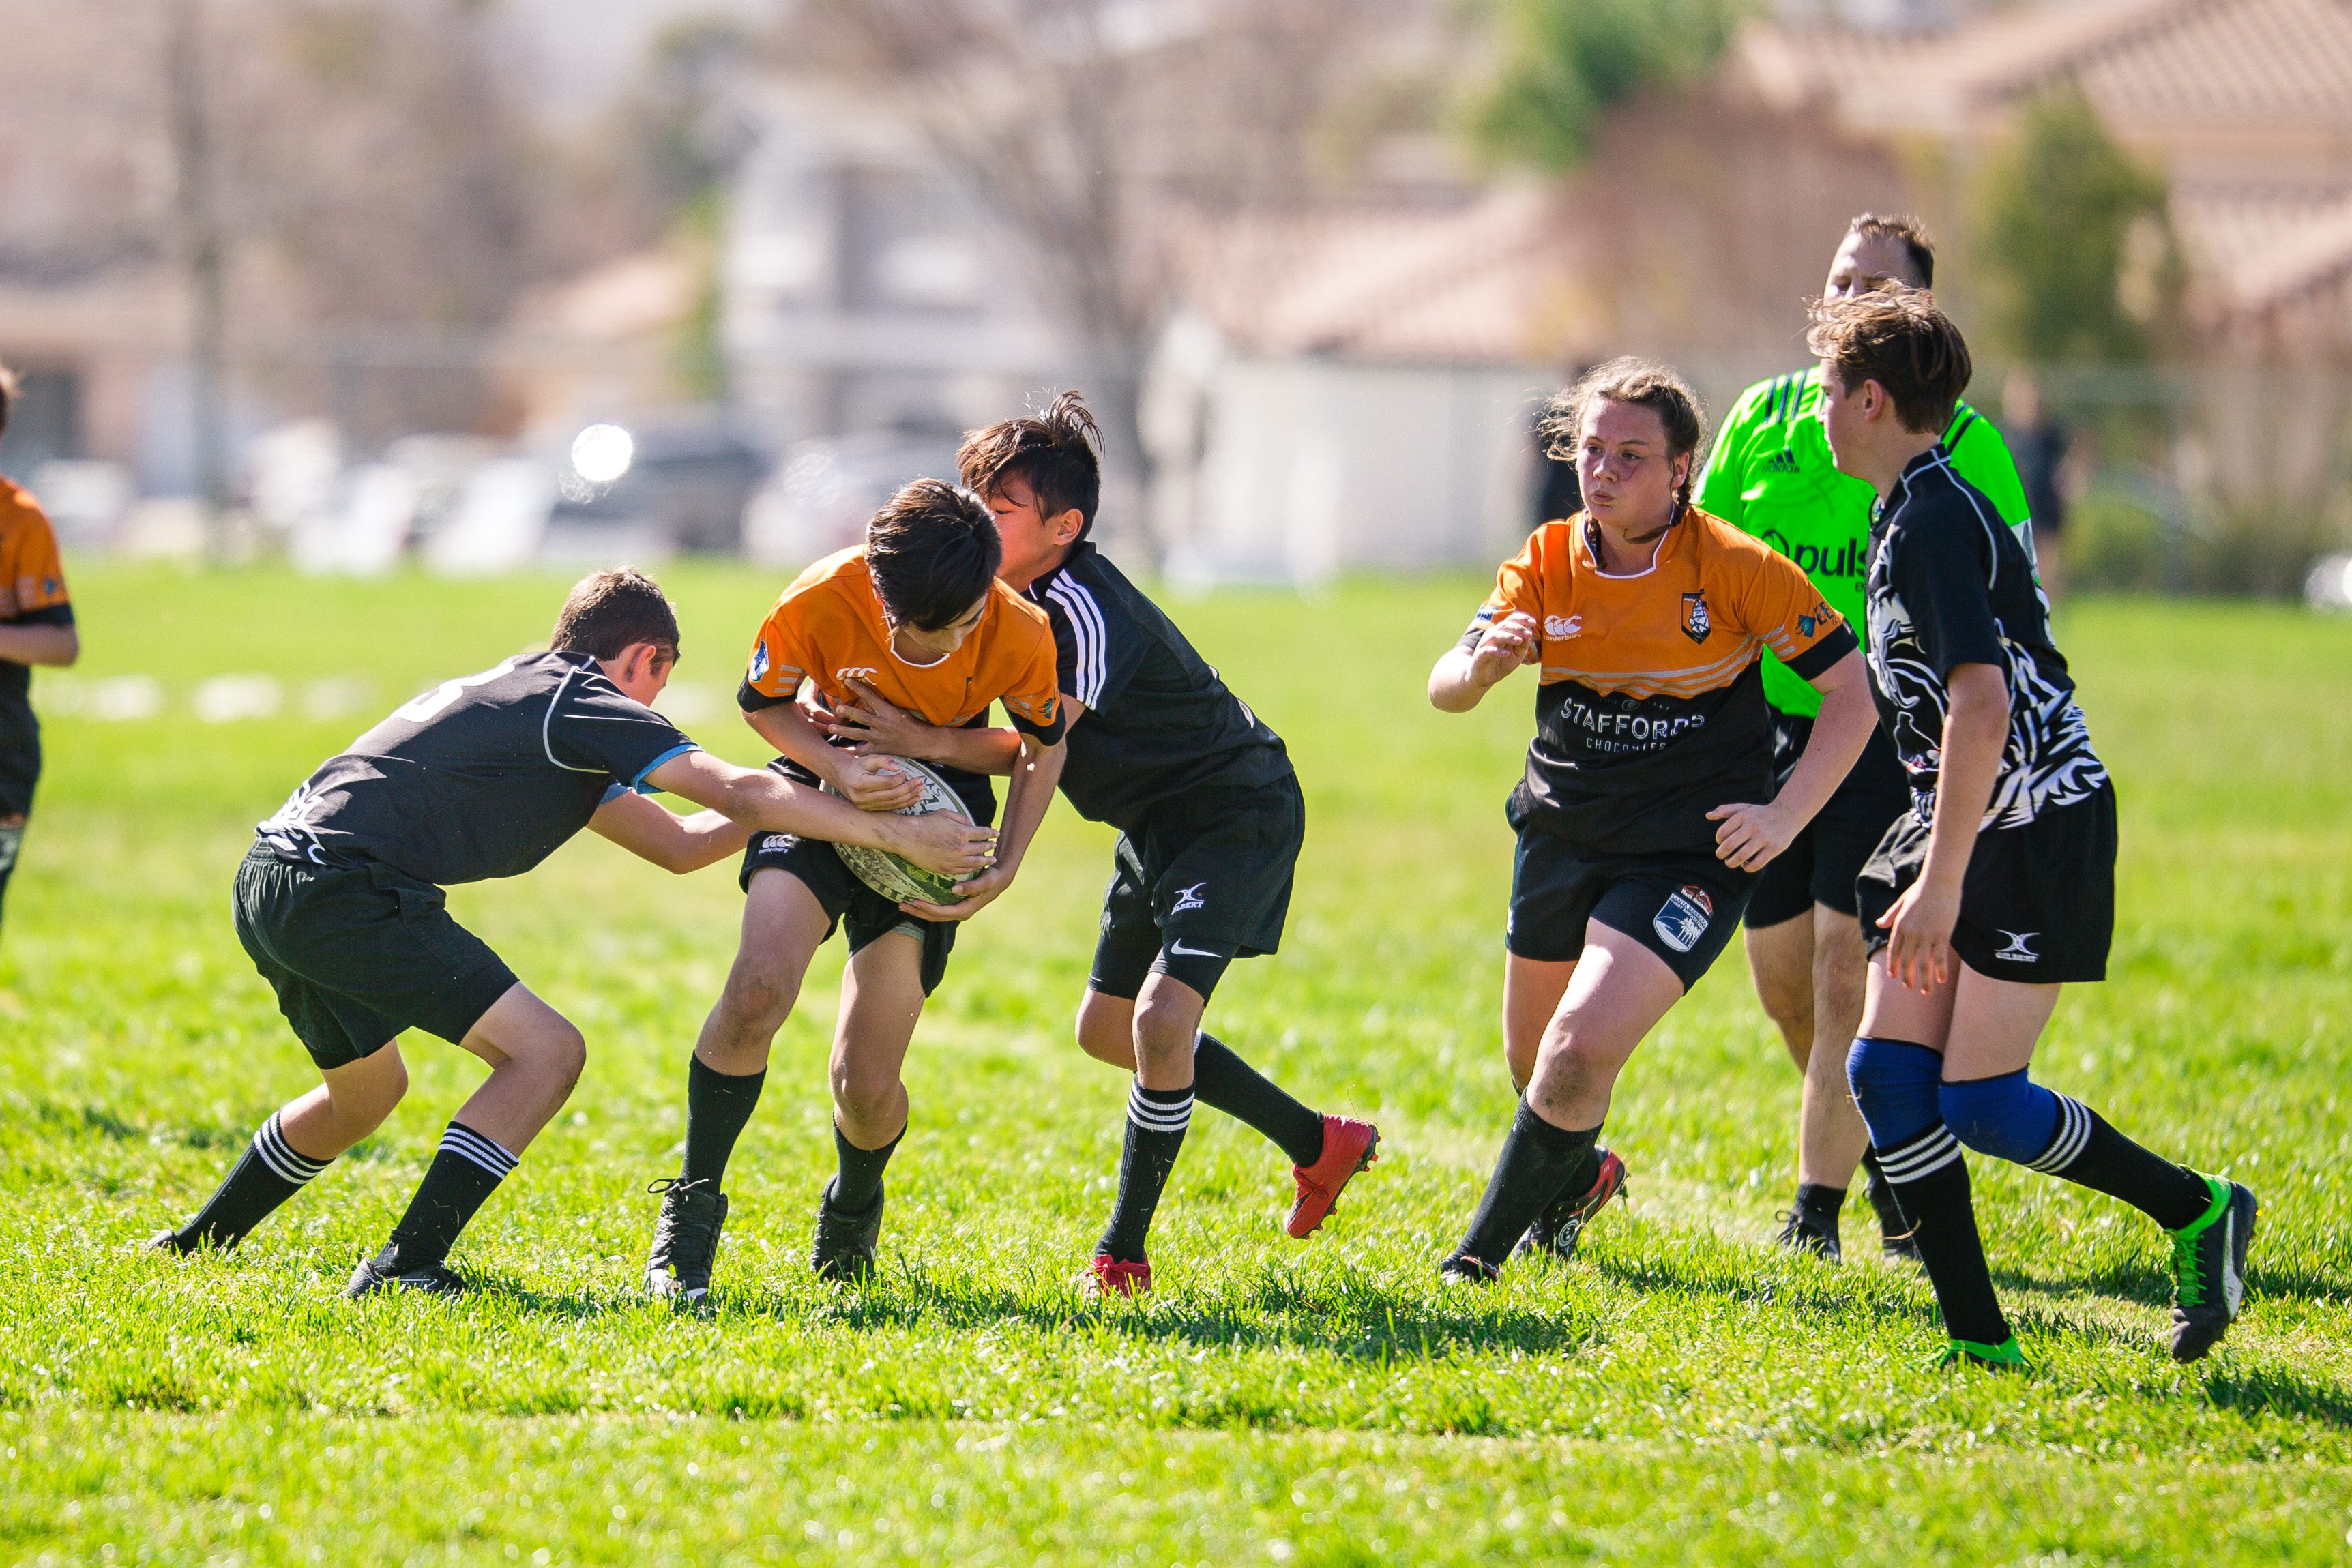 Youth rugby club gets grant from LA84 Foundation